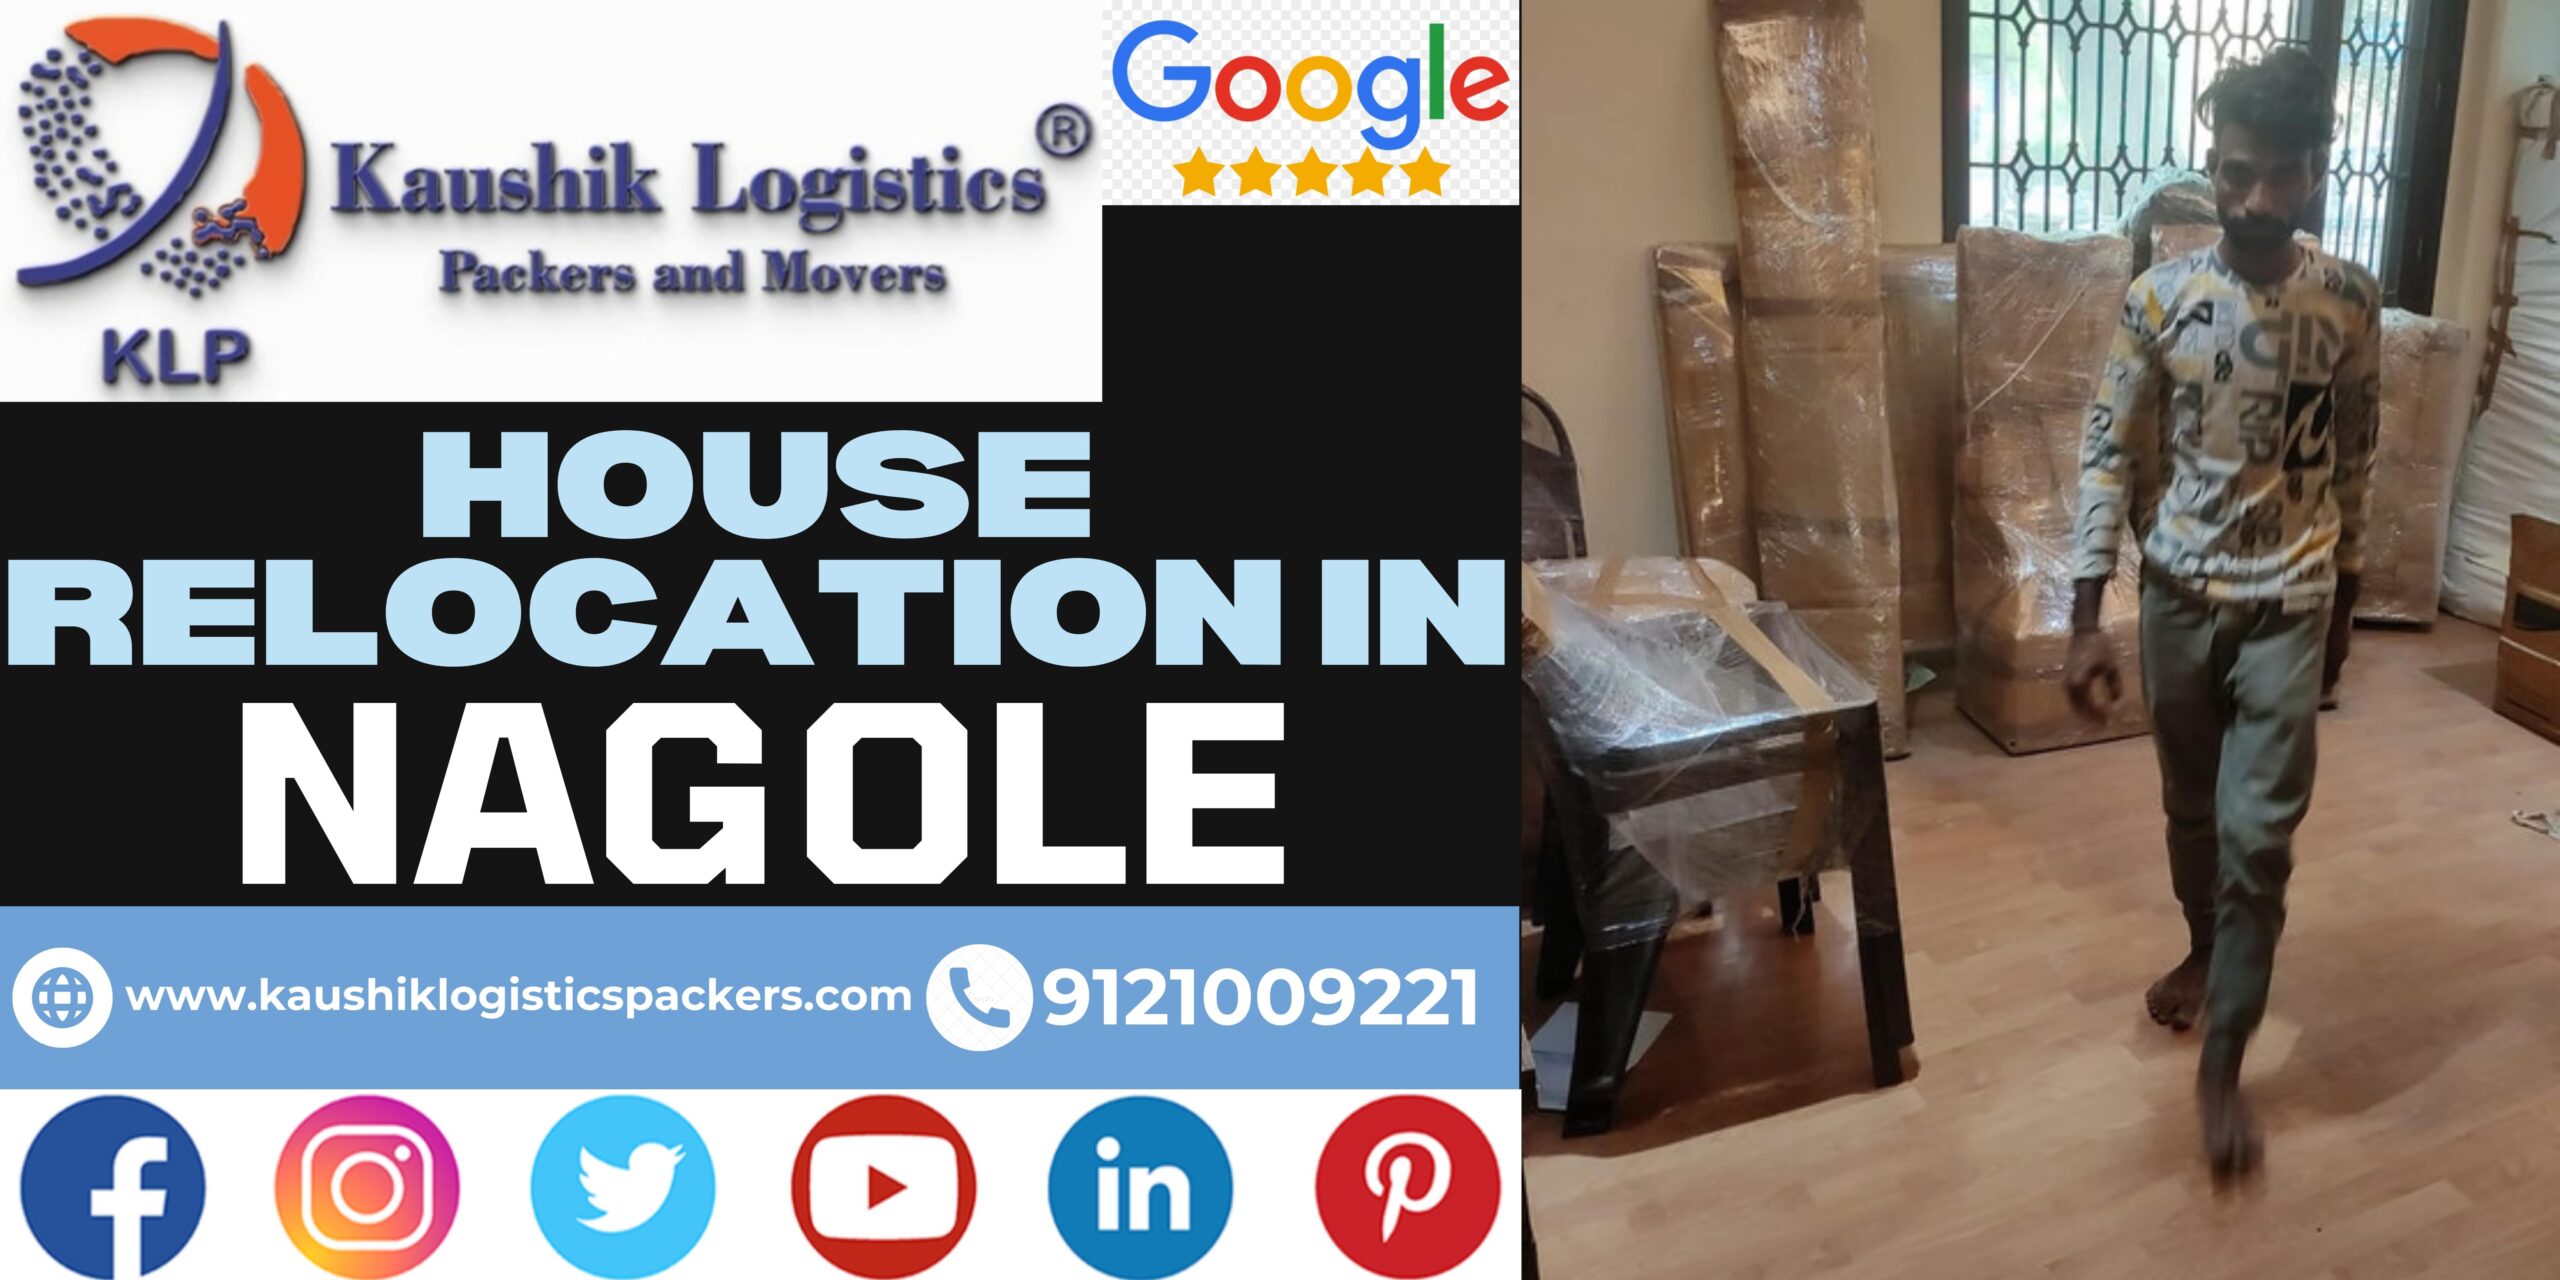 Packers and Movers In Nagole